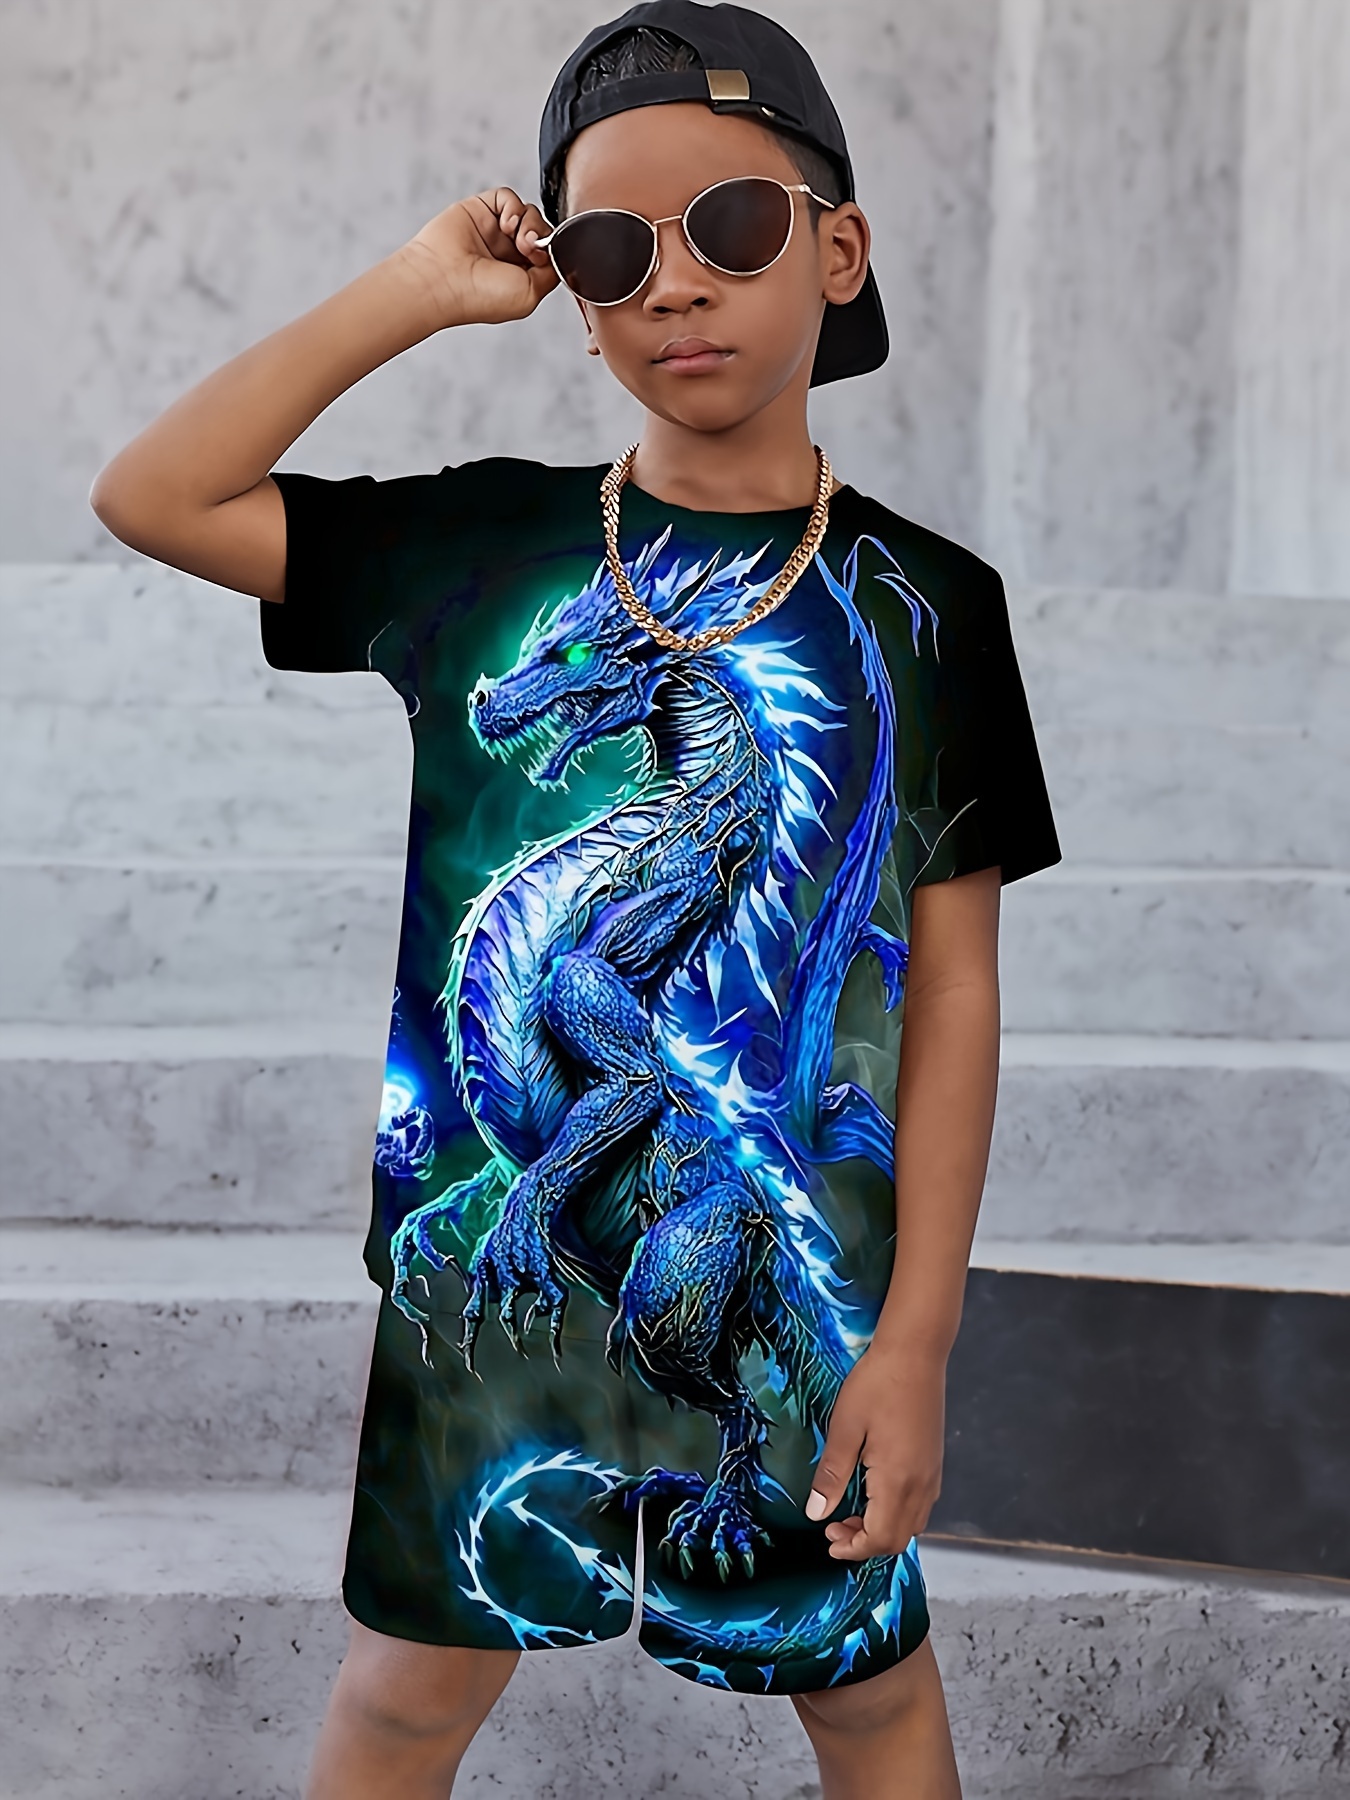 Temu Golden Fish And Cool Old Man Print Boys Creative T-Shirt, Casual Lightweight Comfy Short Sleeve Tee Tops, Kids Clothings For Summer